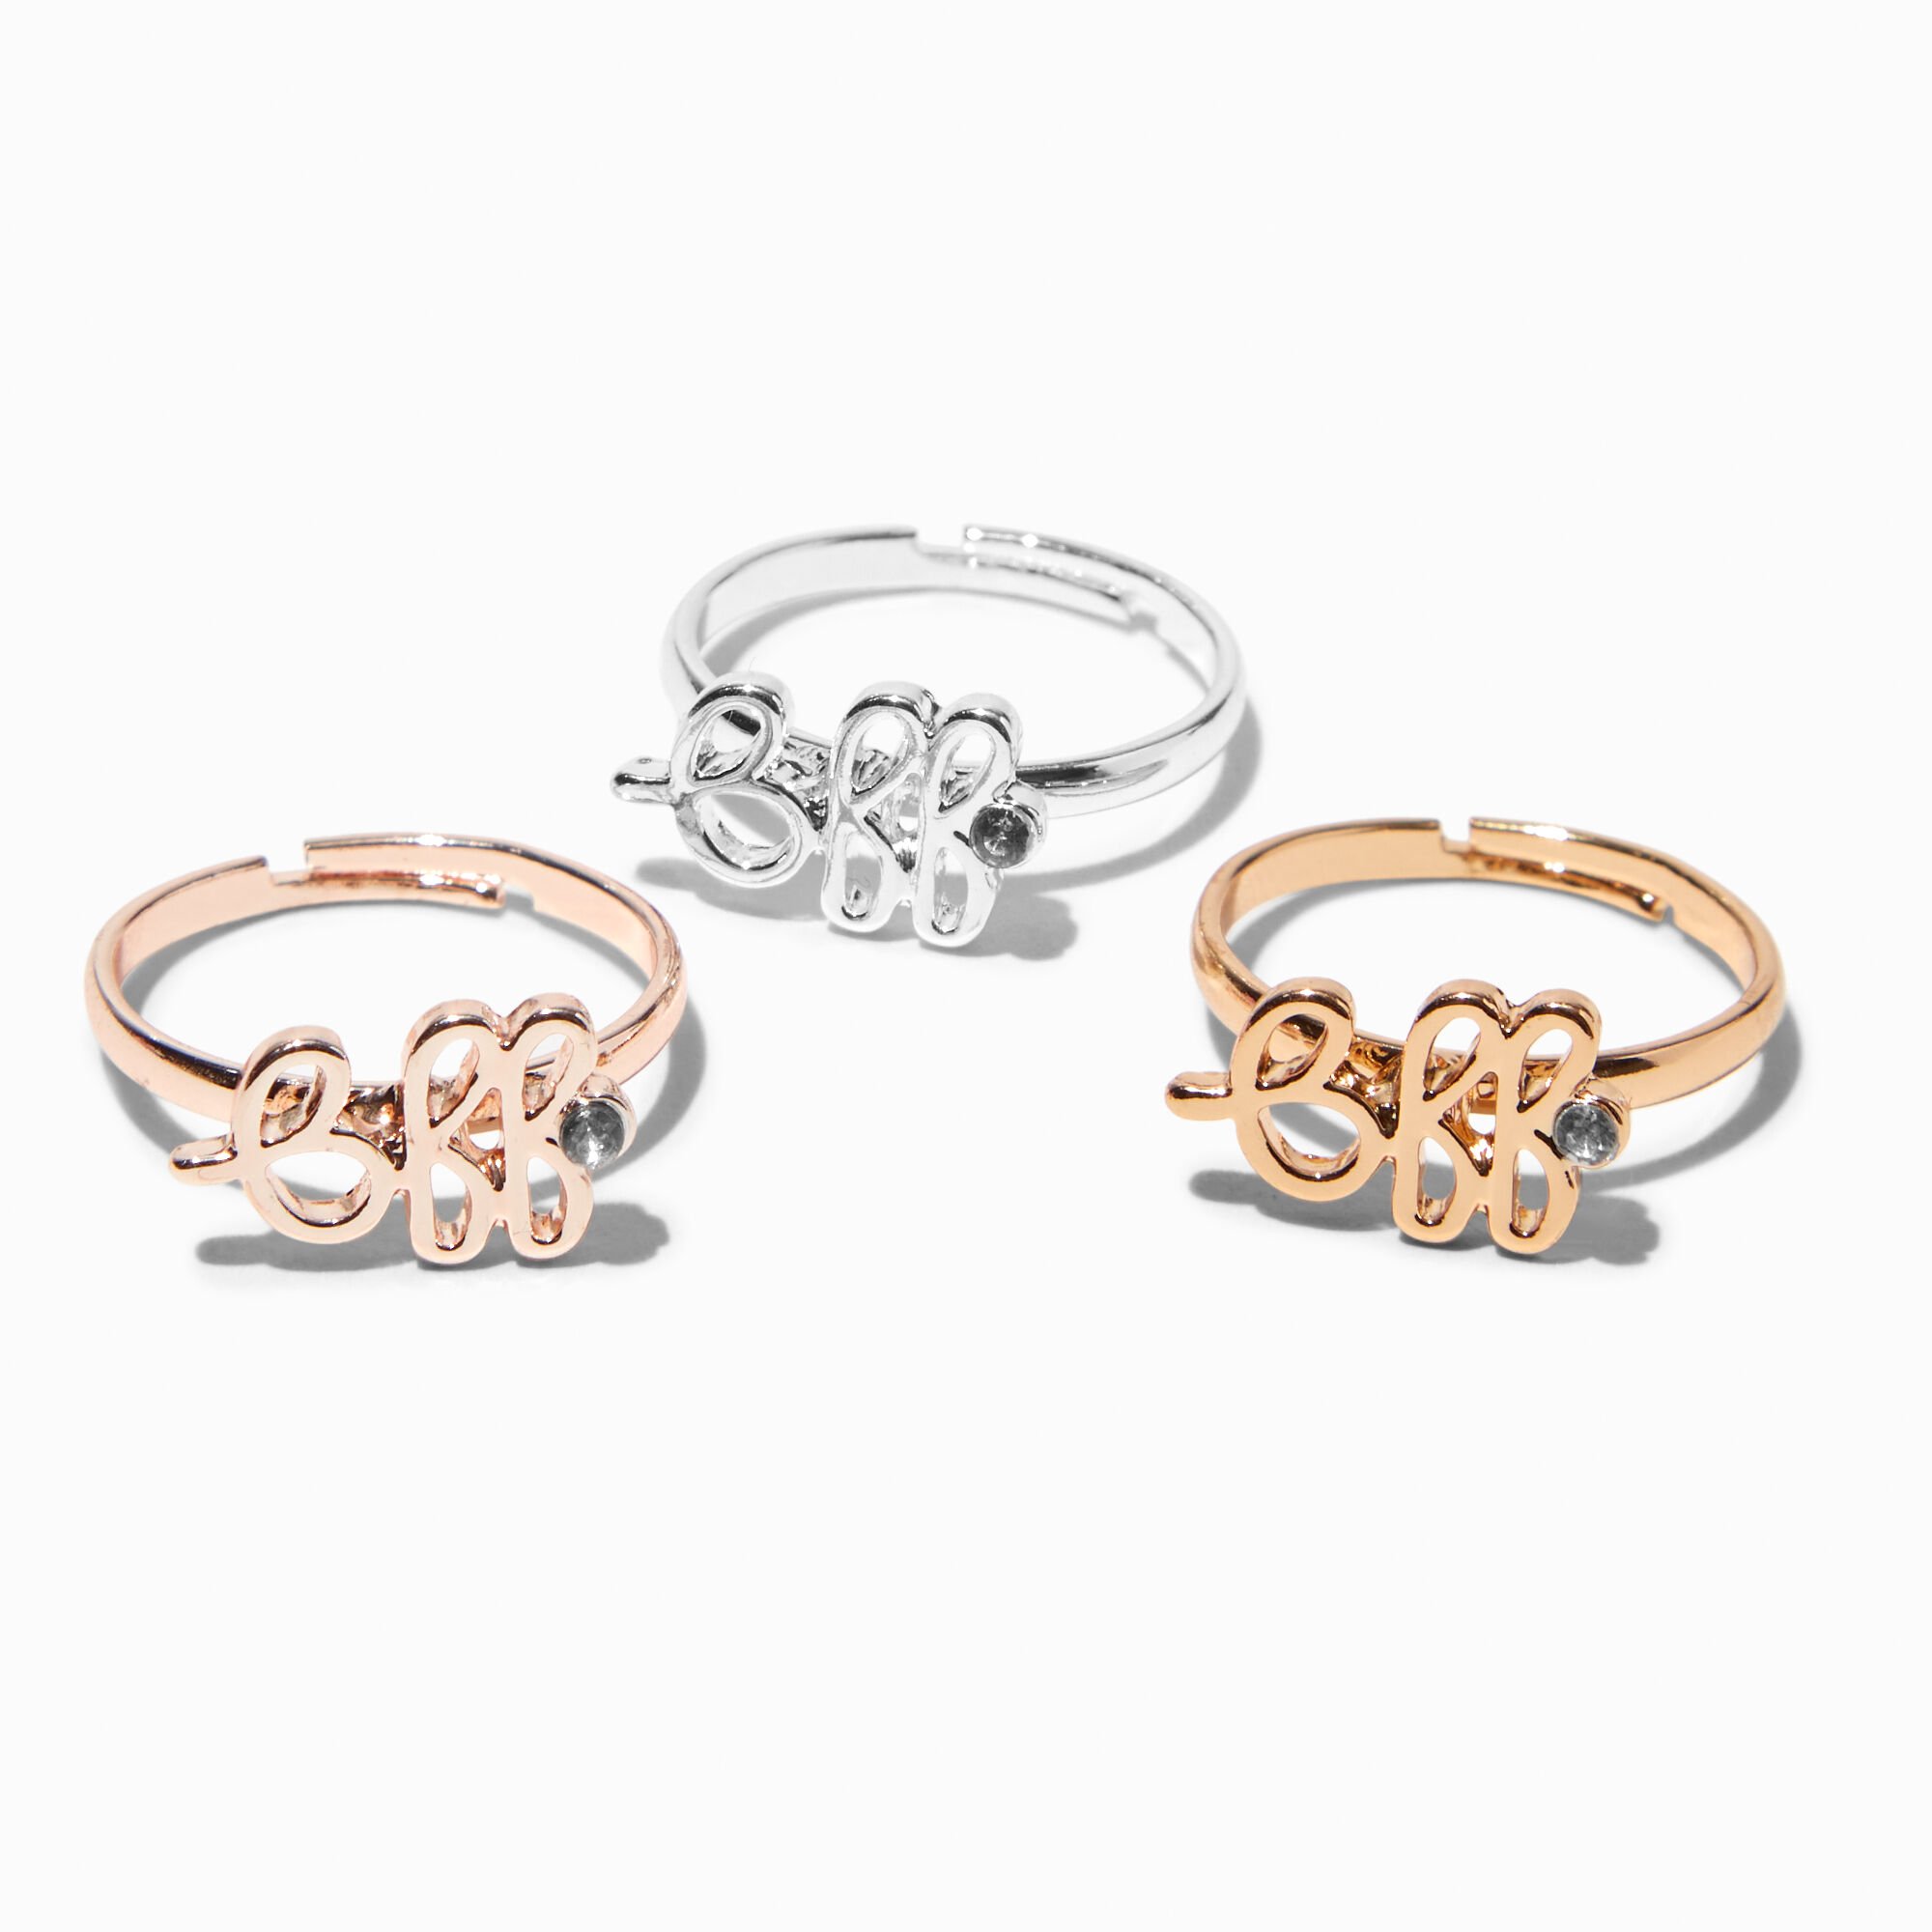 View Claires Mixed Metal Best Friends Bff Adjustable Rings 3 Pack Rose Gold information